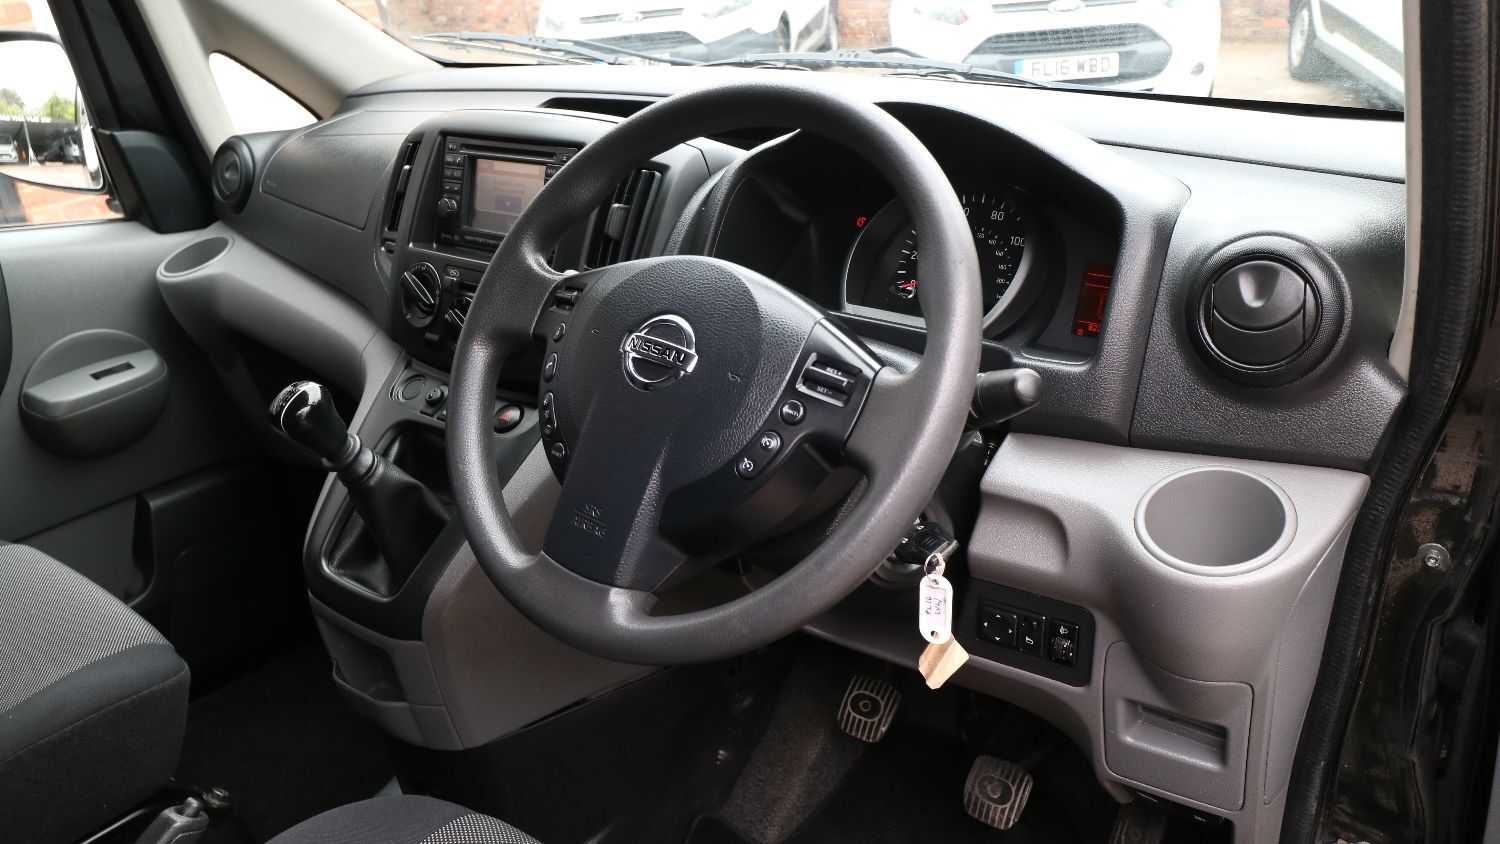 Used NISSAN NV200 in Moss Nook, Manchester